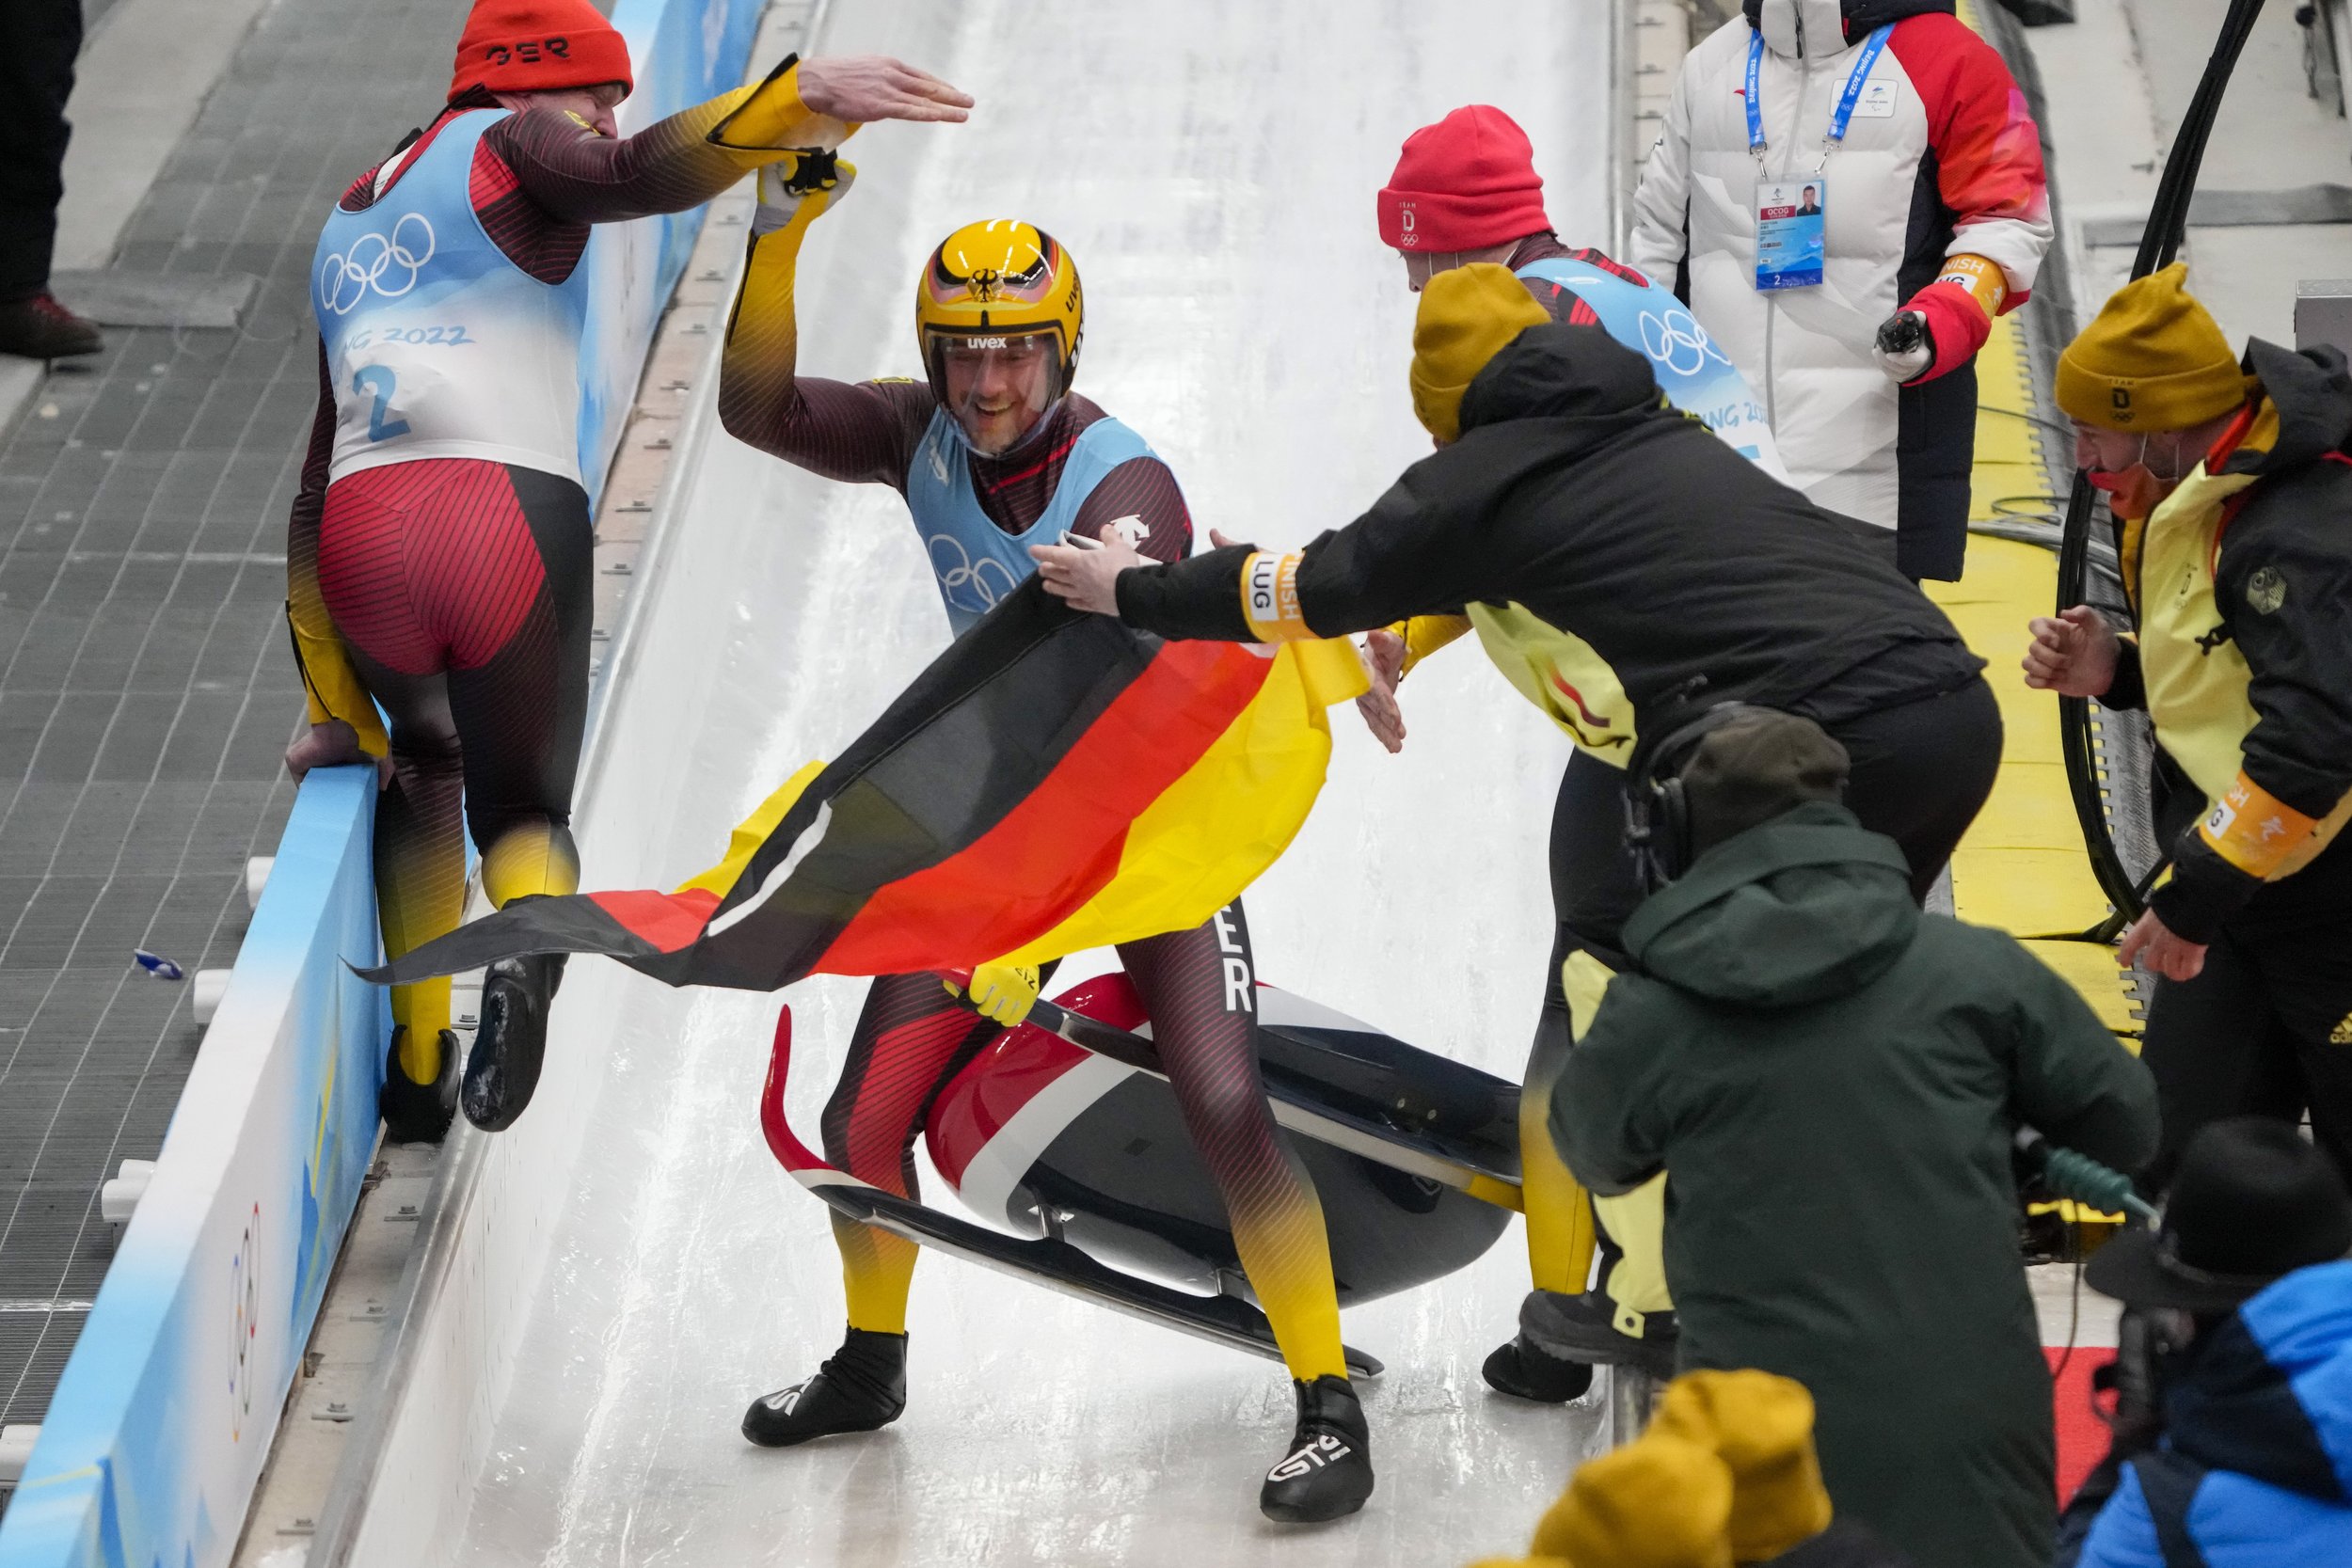  Johannes Ludwig, of Germany, celebrates winning the gold medal in luge men's singles at the 2022 Winter Olympics, Sunday, Feb. 6, 2022, in the Yanqing district of Beijing. (AP Photo/Mark Schiefelbein) 